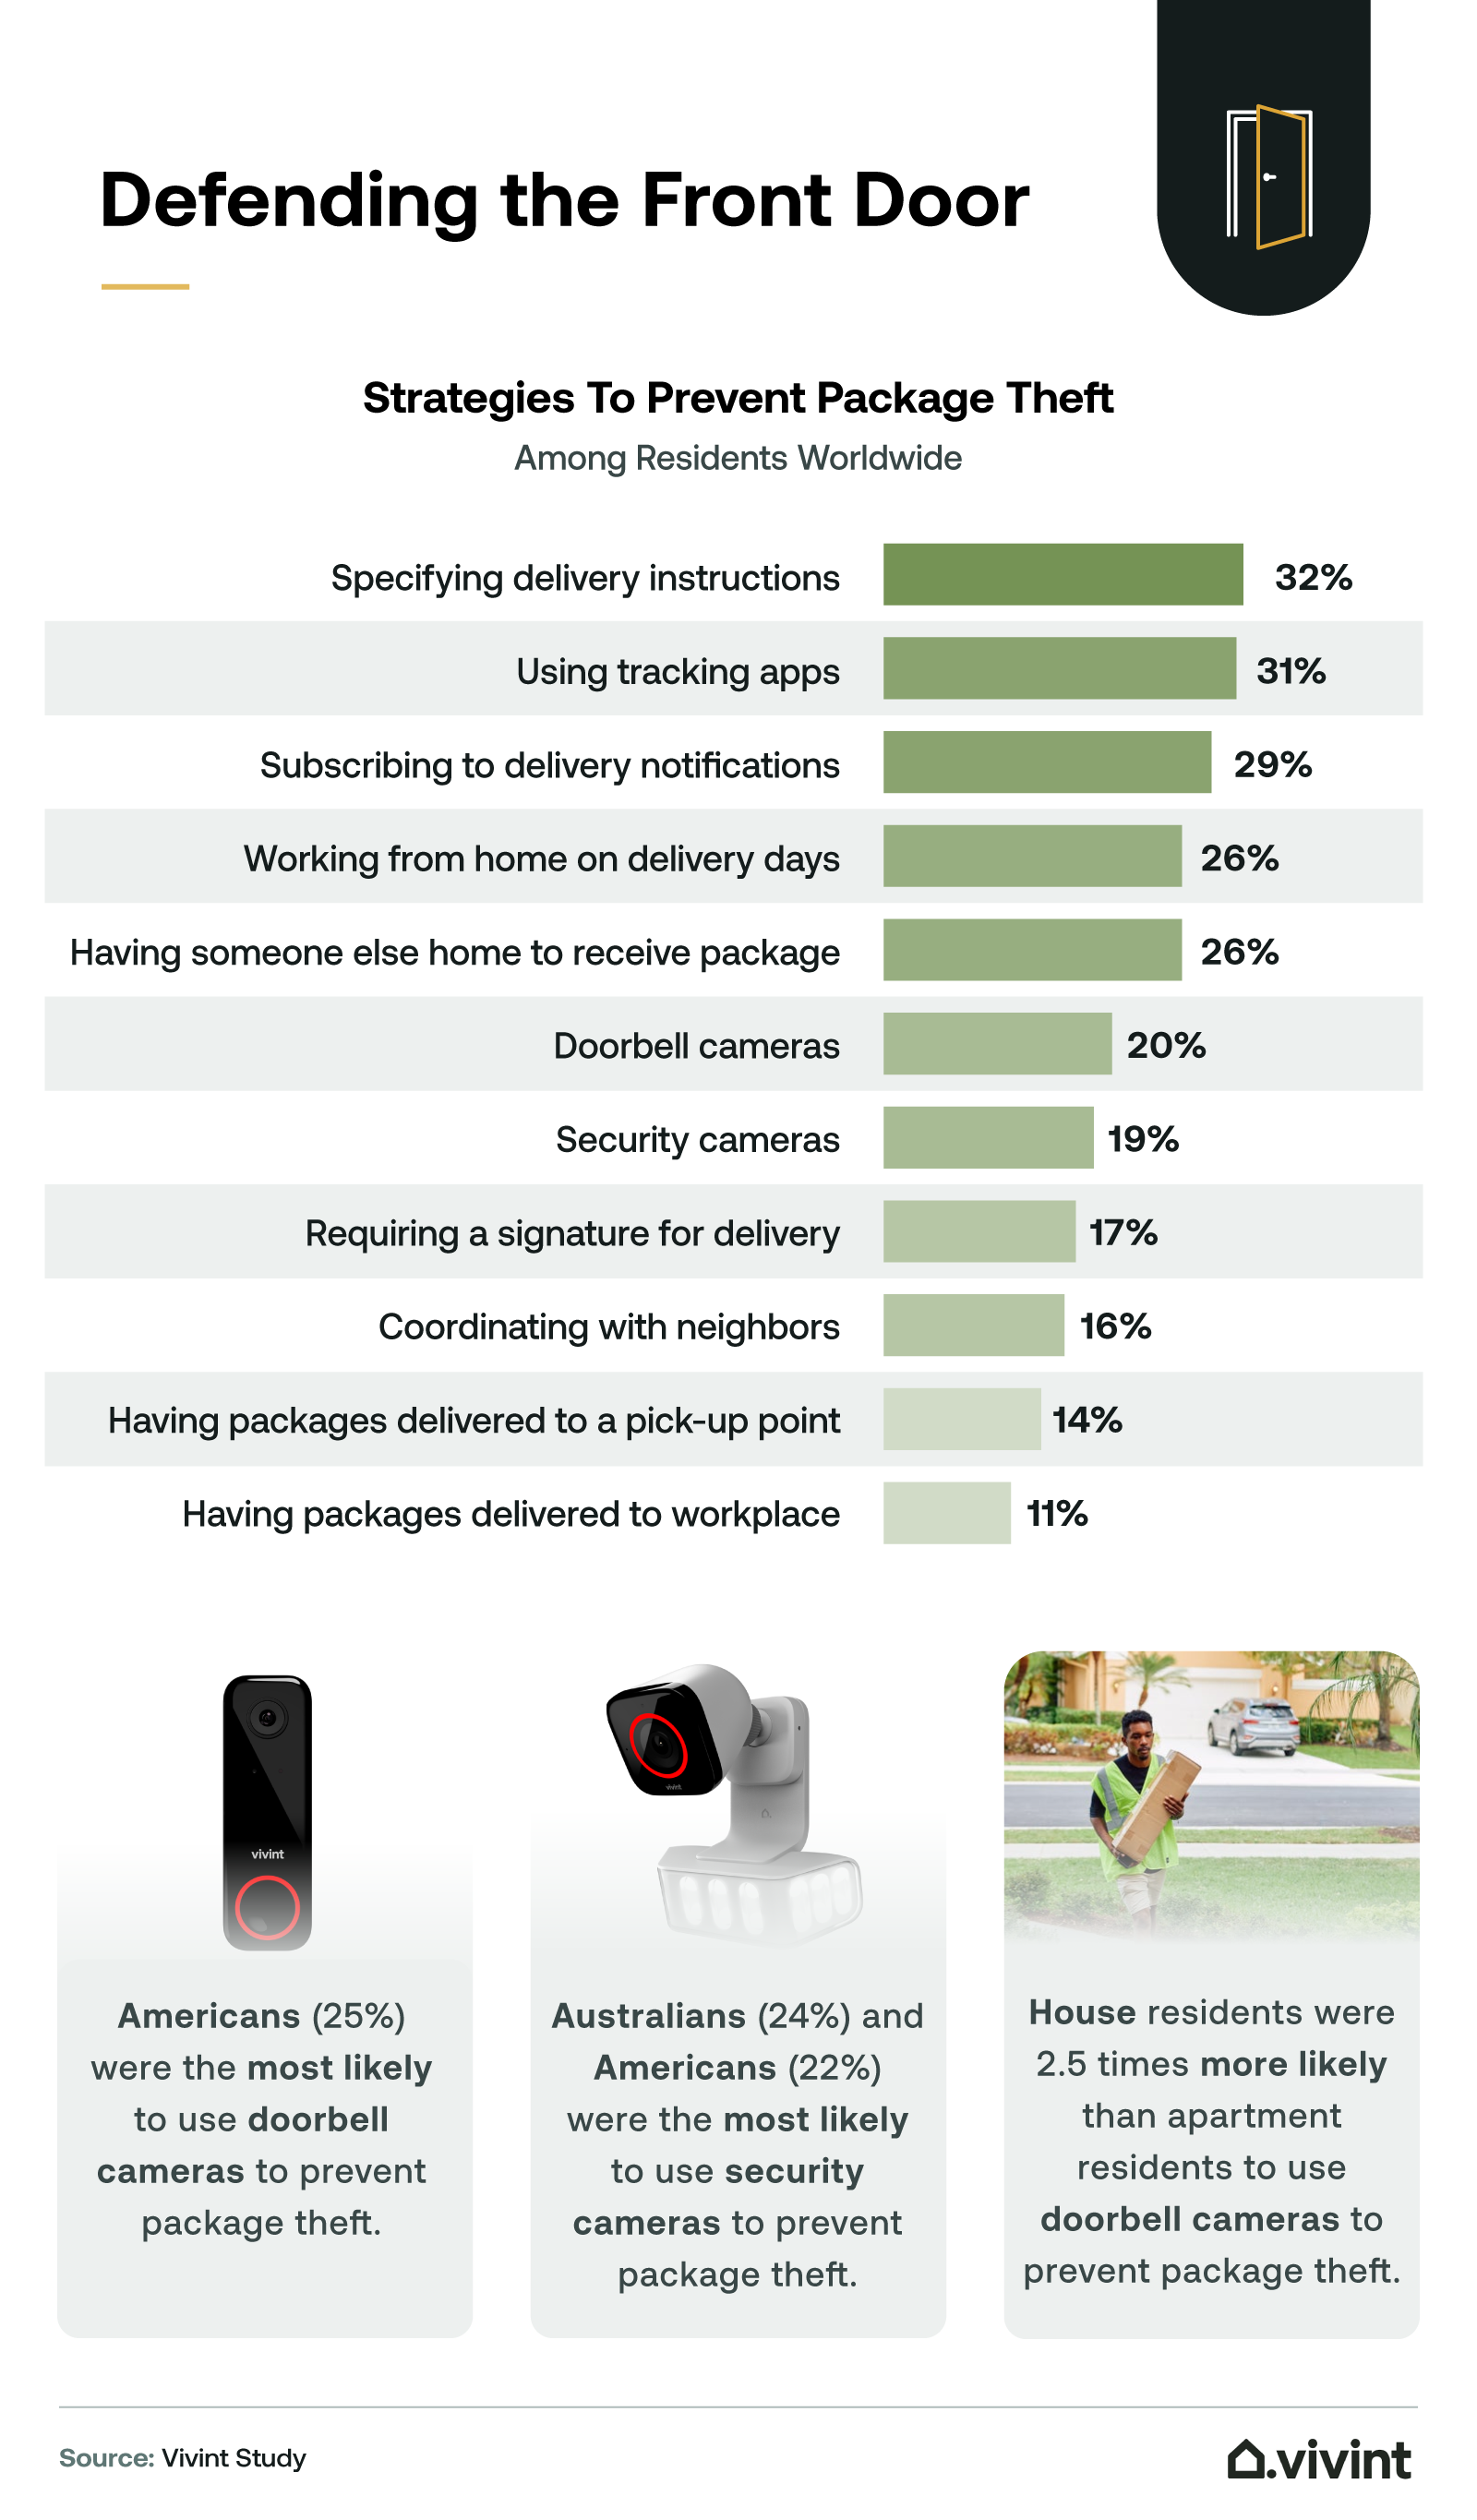 Information about strategies people use to protect their package deliveries.